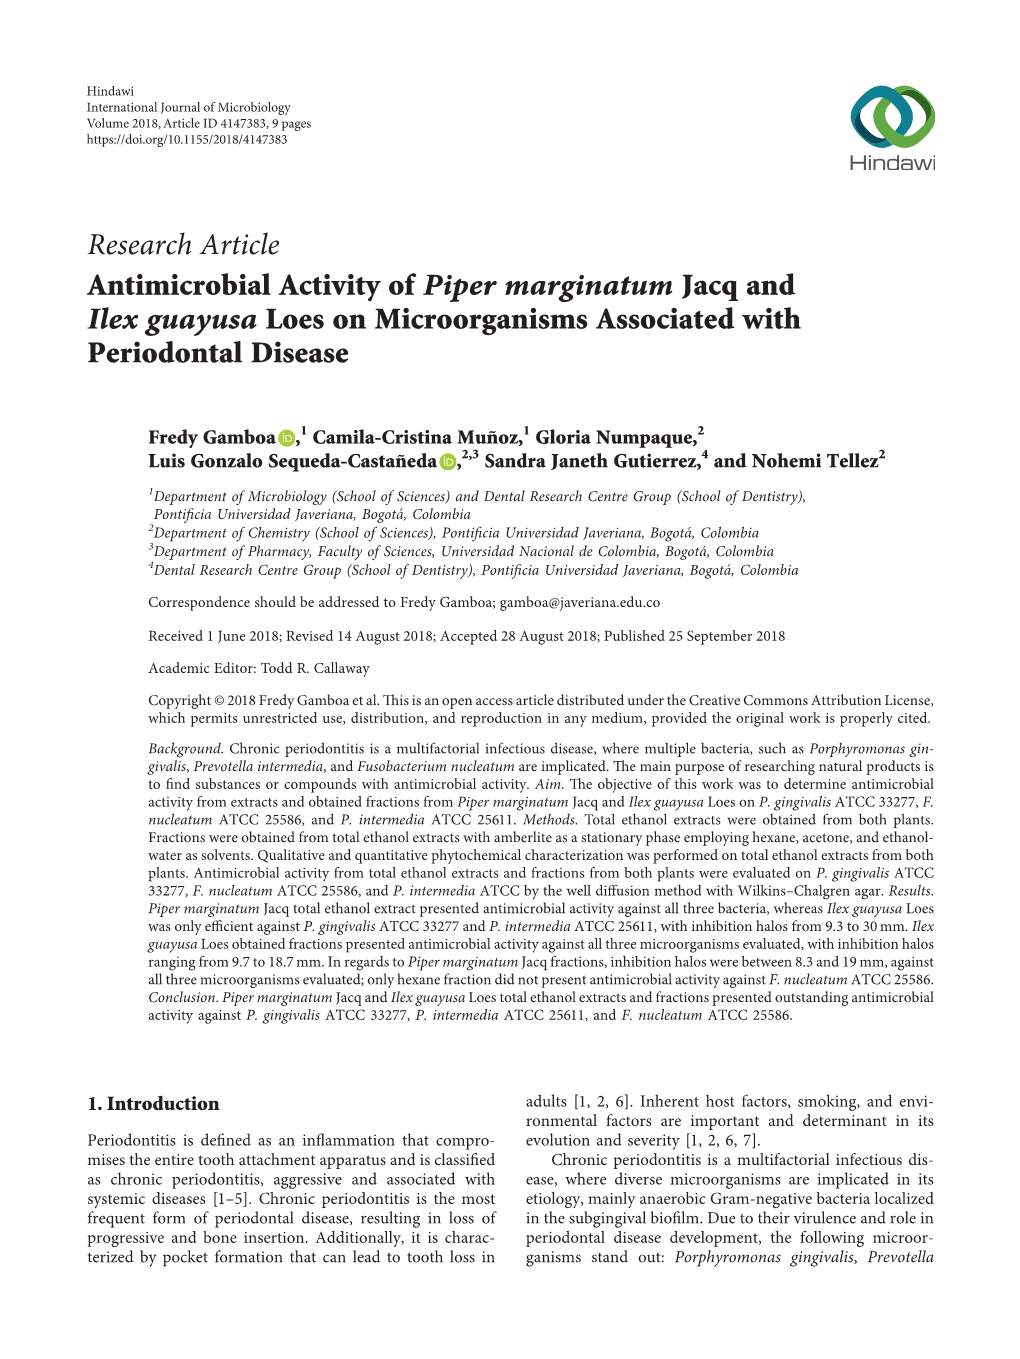 Antimicrobial Activity of Piper Marginatum Jacq and Ilex Guayusa Loes on Microorganisms Associated with Periodontal Disease